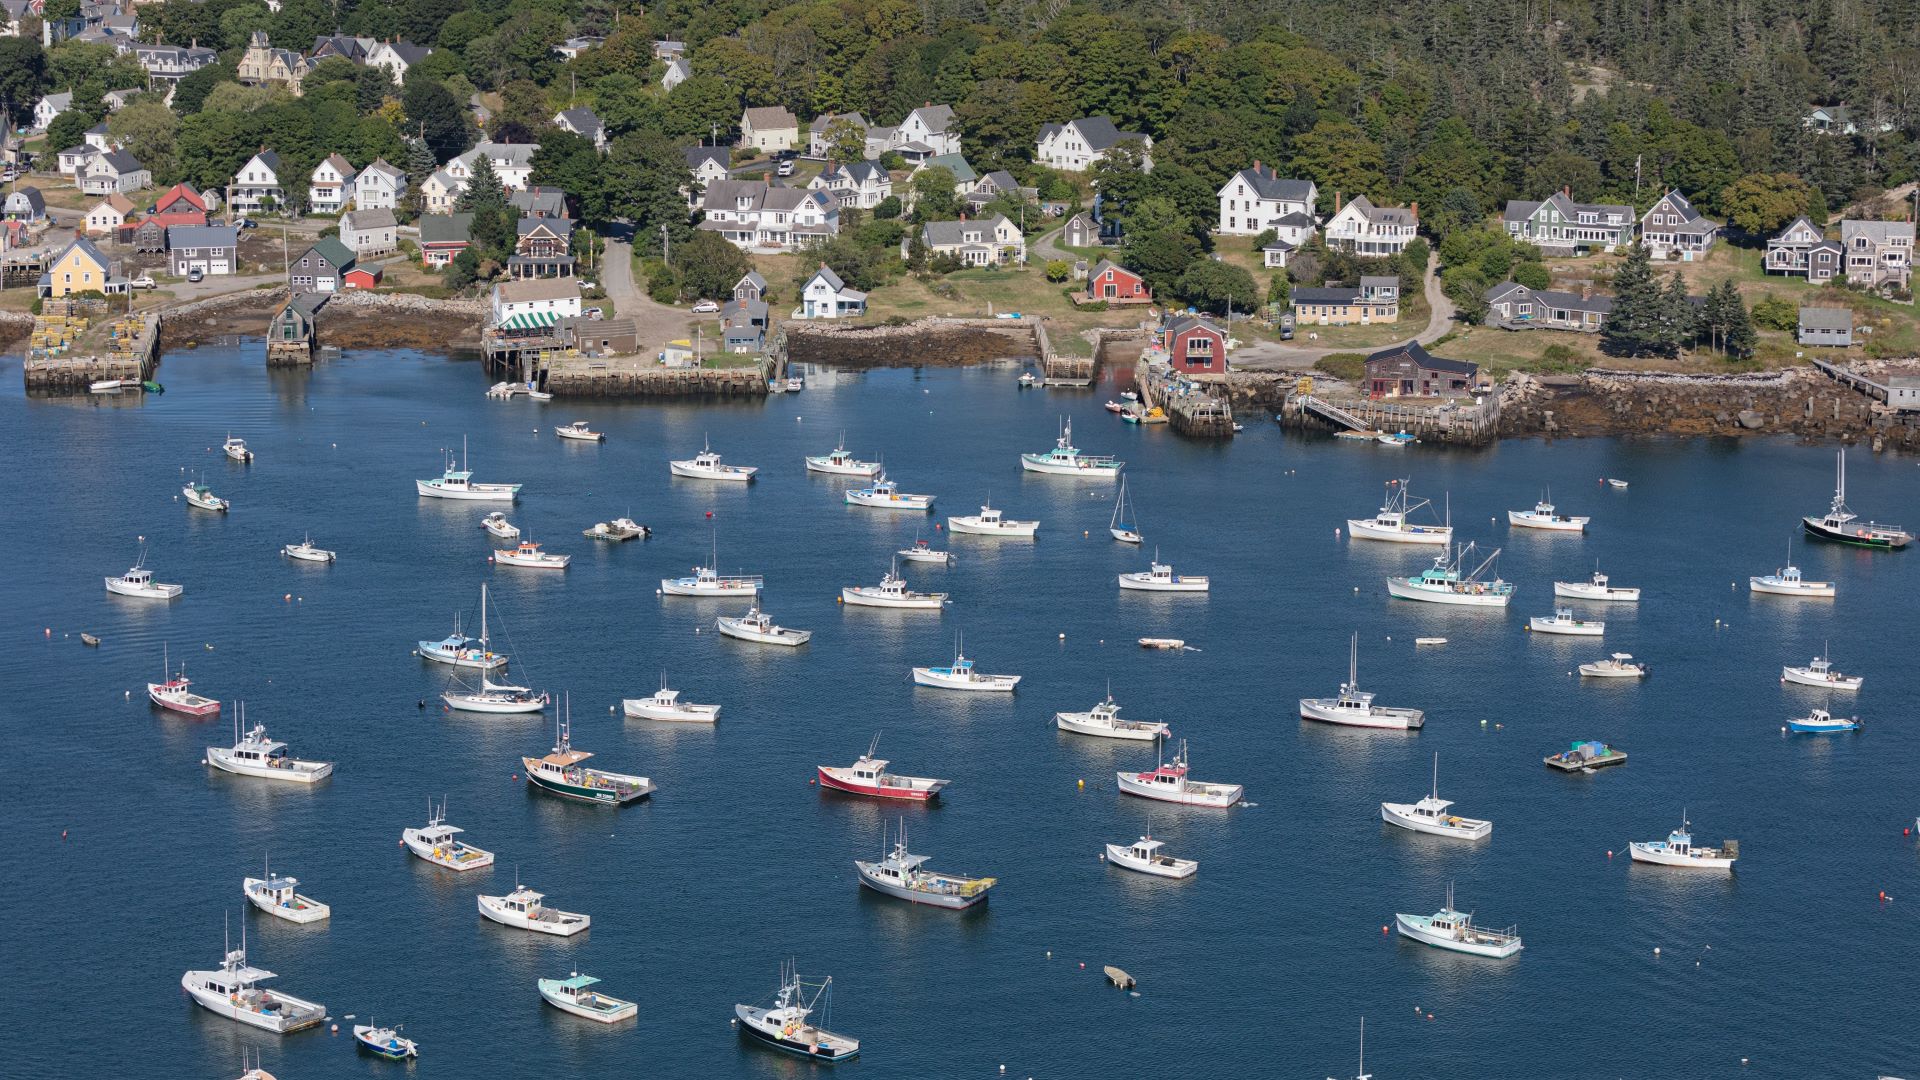 Aerial view of boats moored in the Vinalhaven harbor